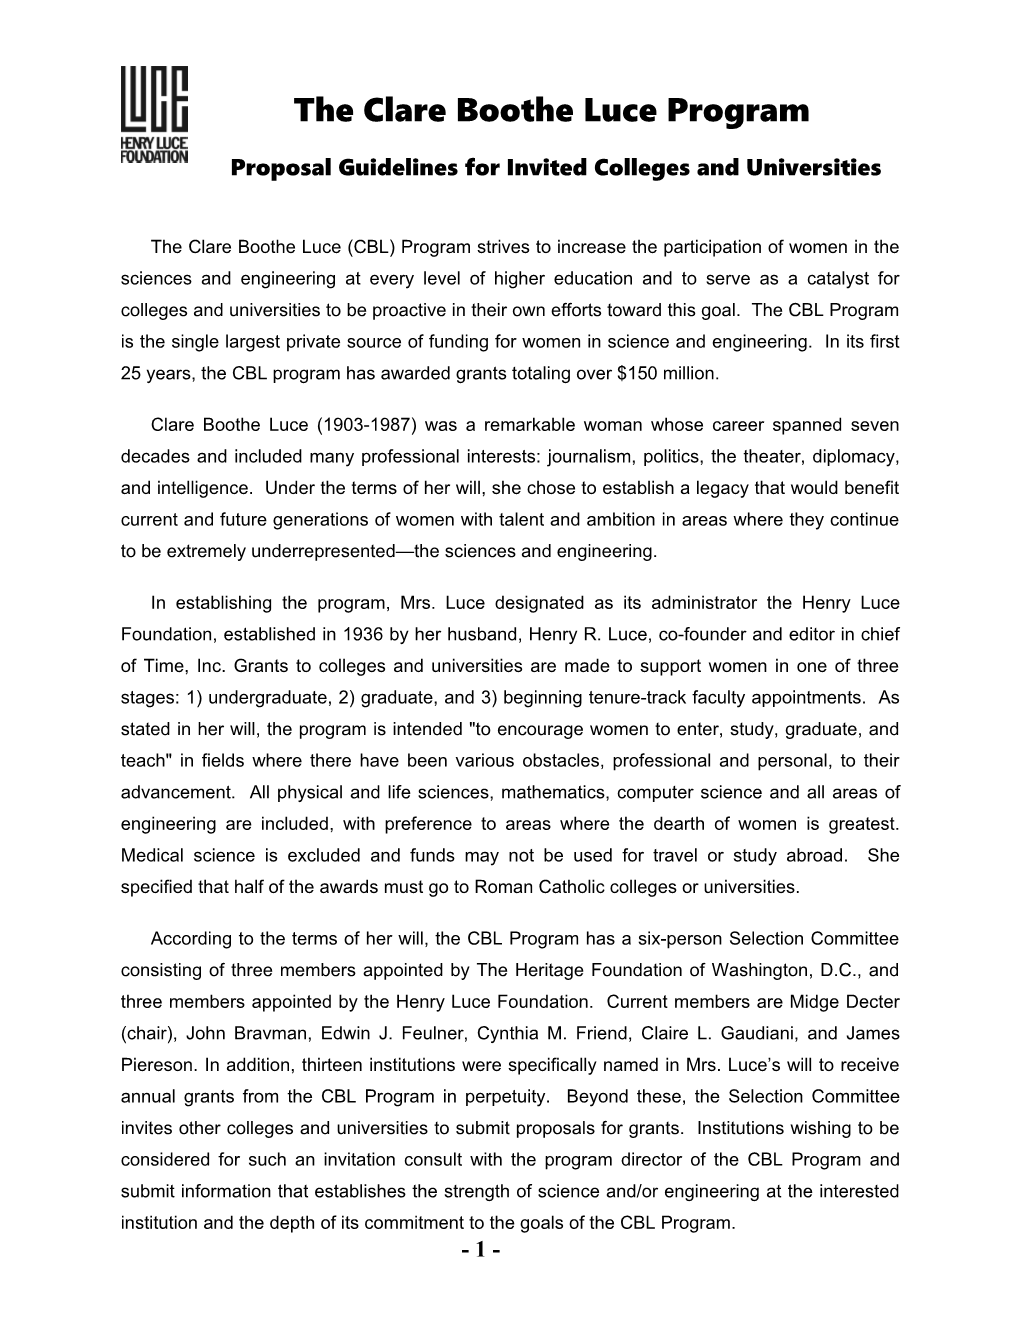 Proposal Guidelines for Invited Colleges and Universities